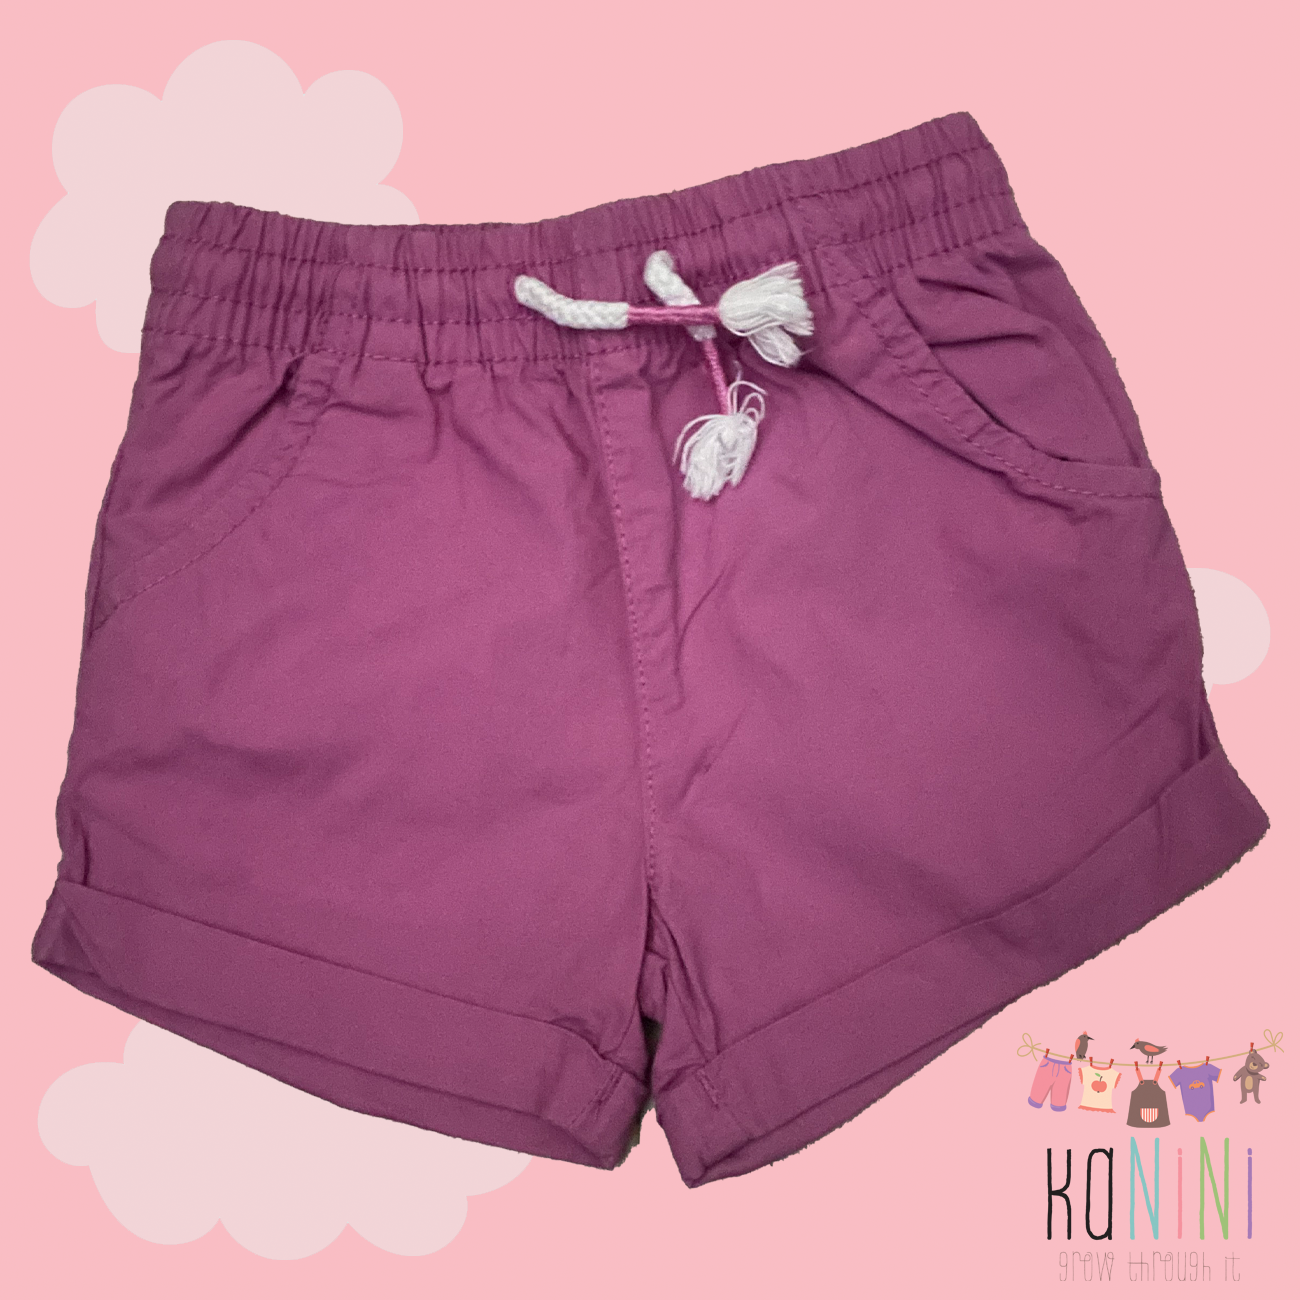 Featured image for “Woolworths 3 - 6 Months Girls Purple Shorts”